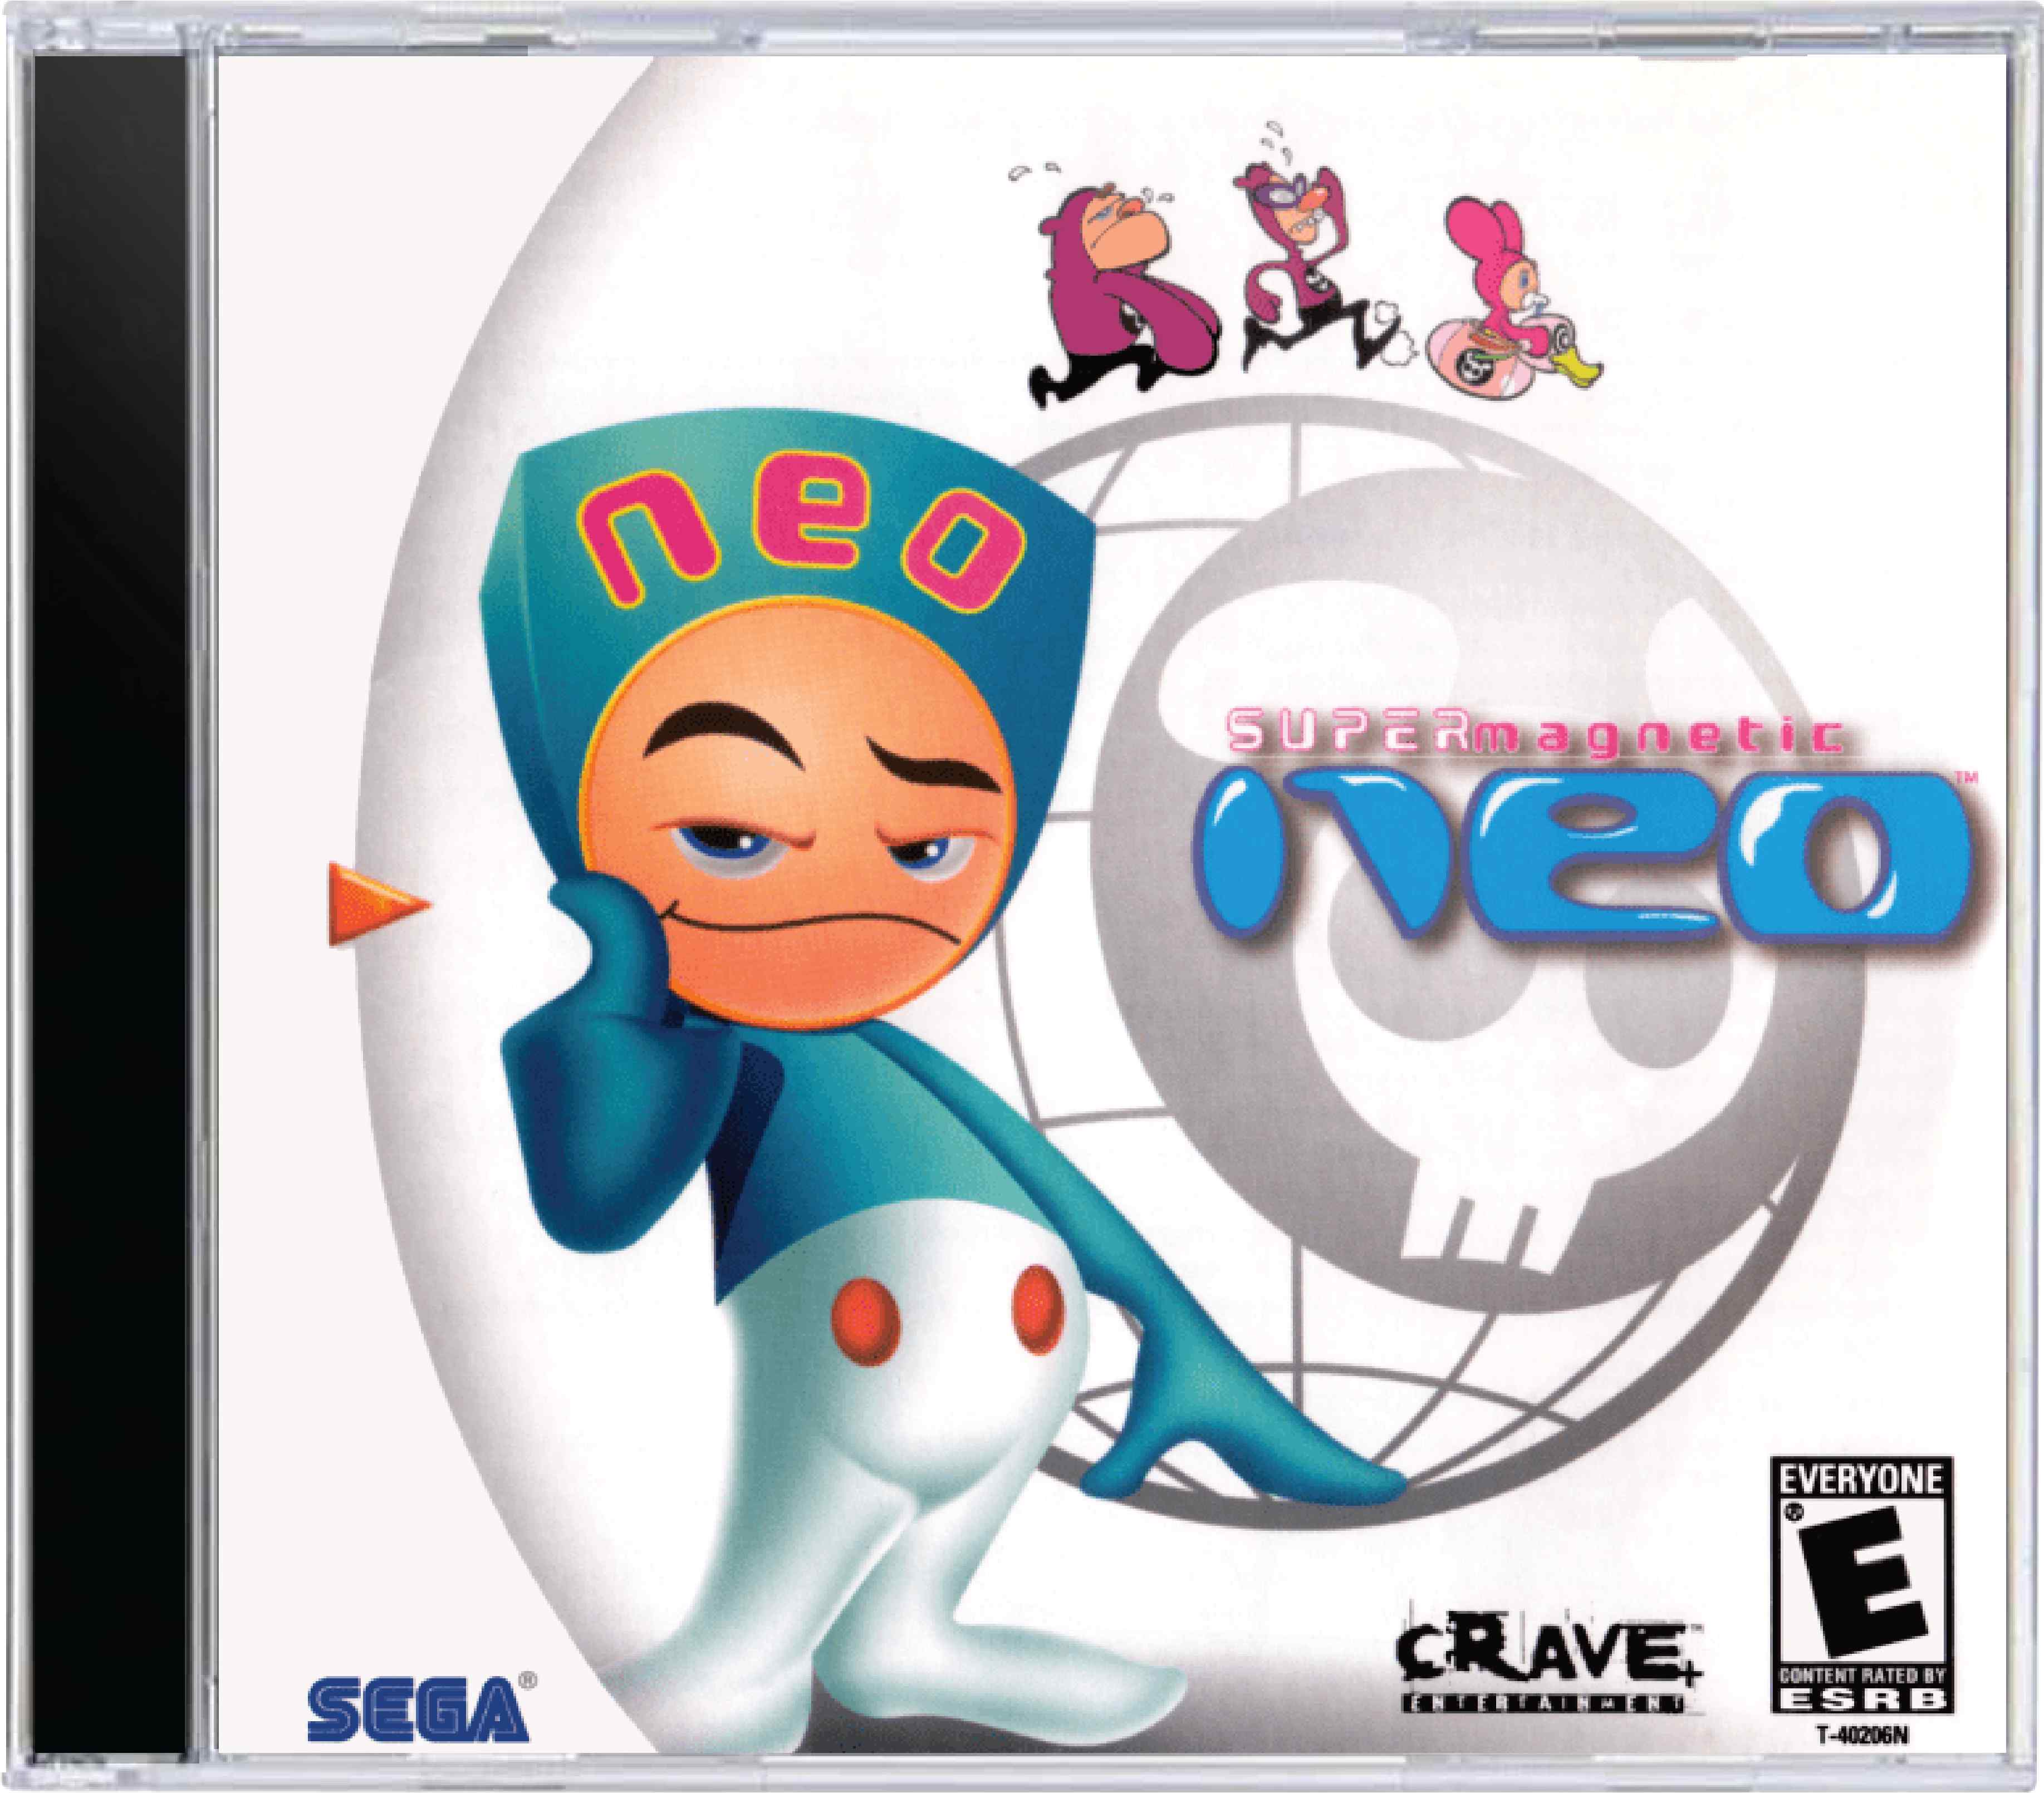 Super Magnetic Neo Cover Art